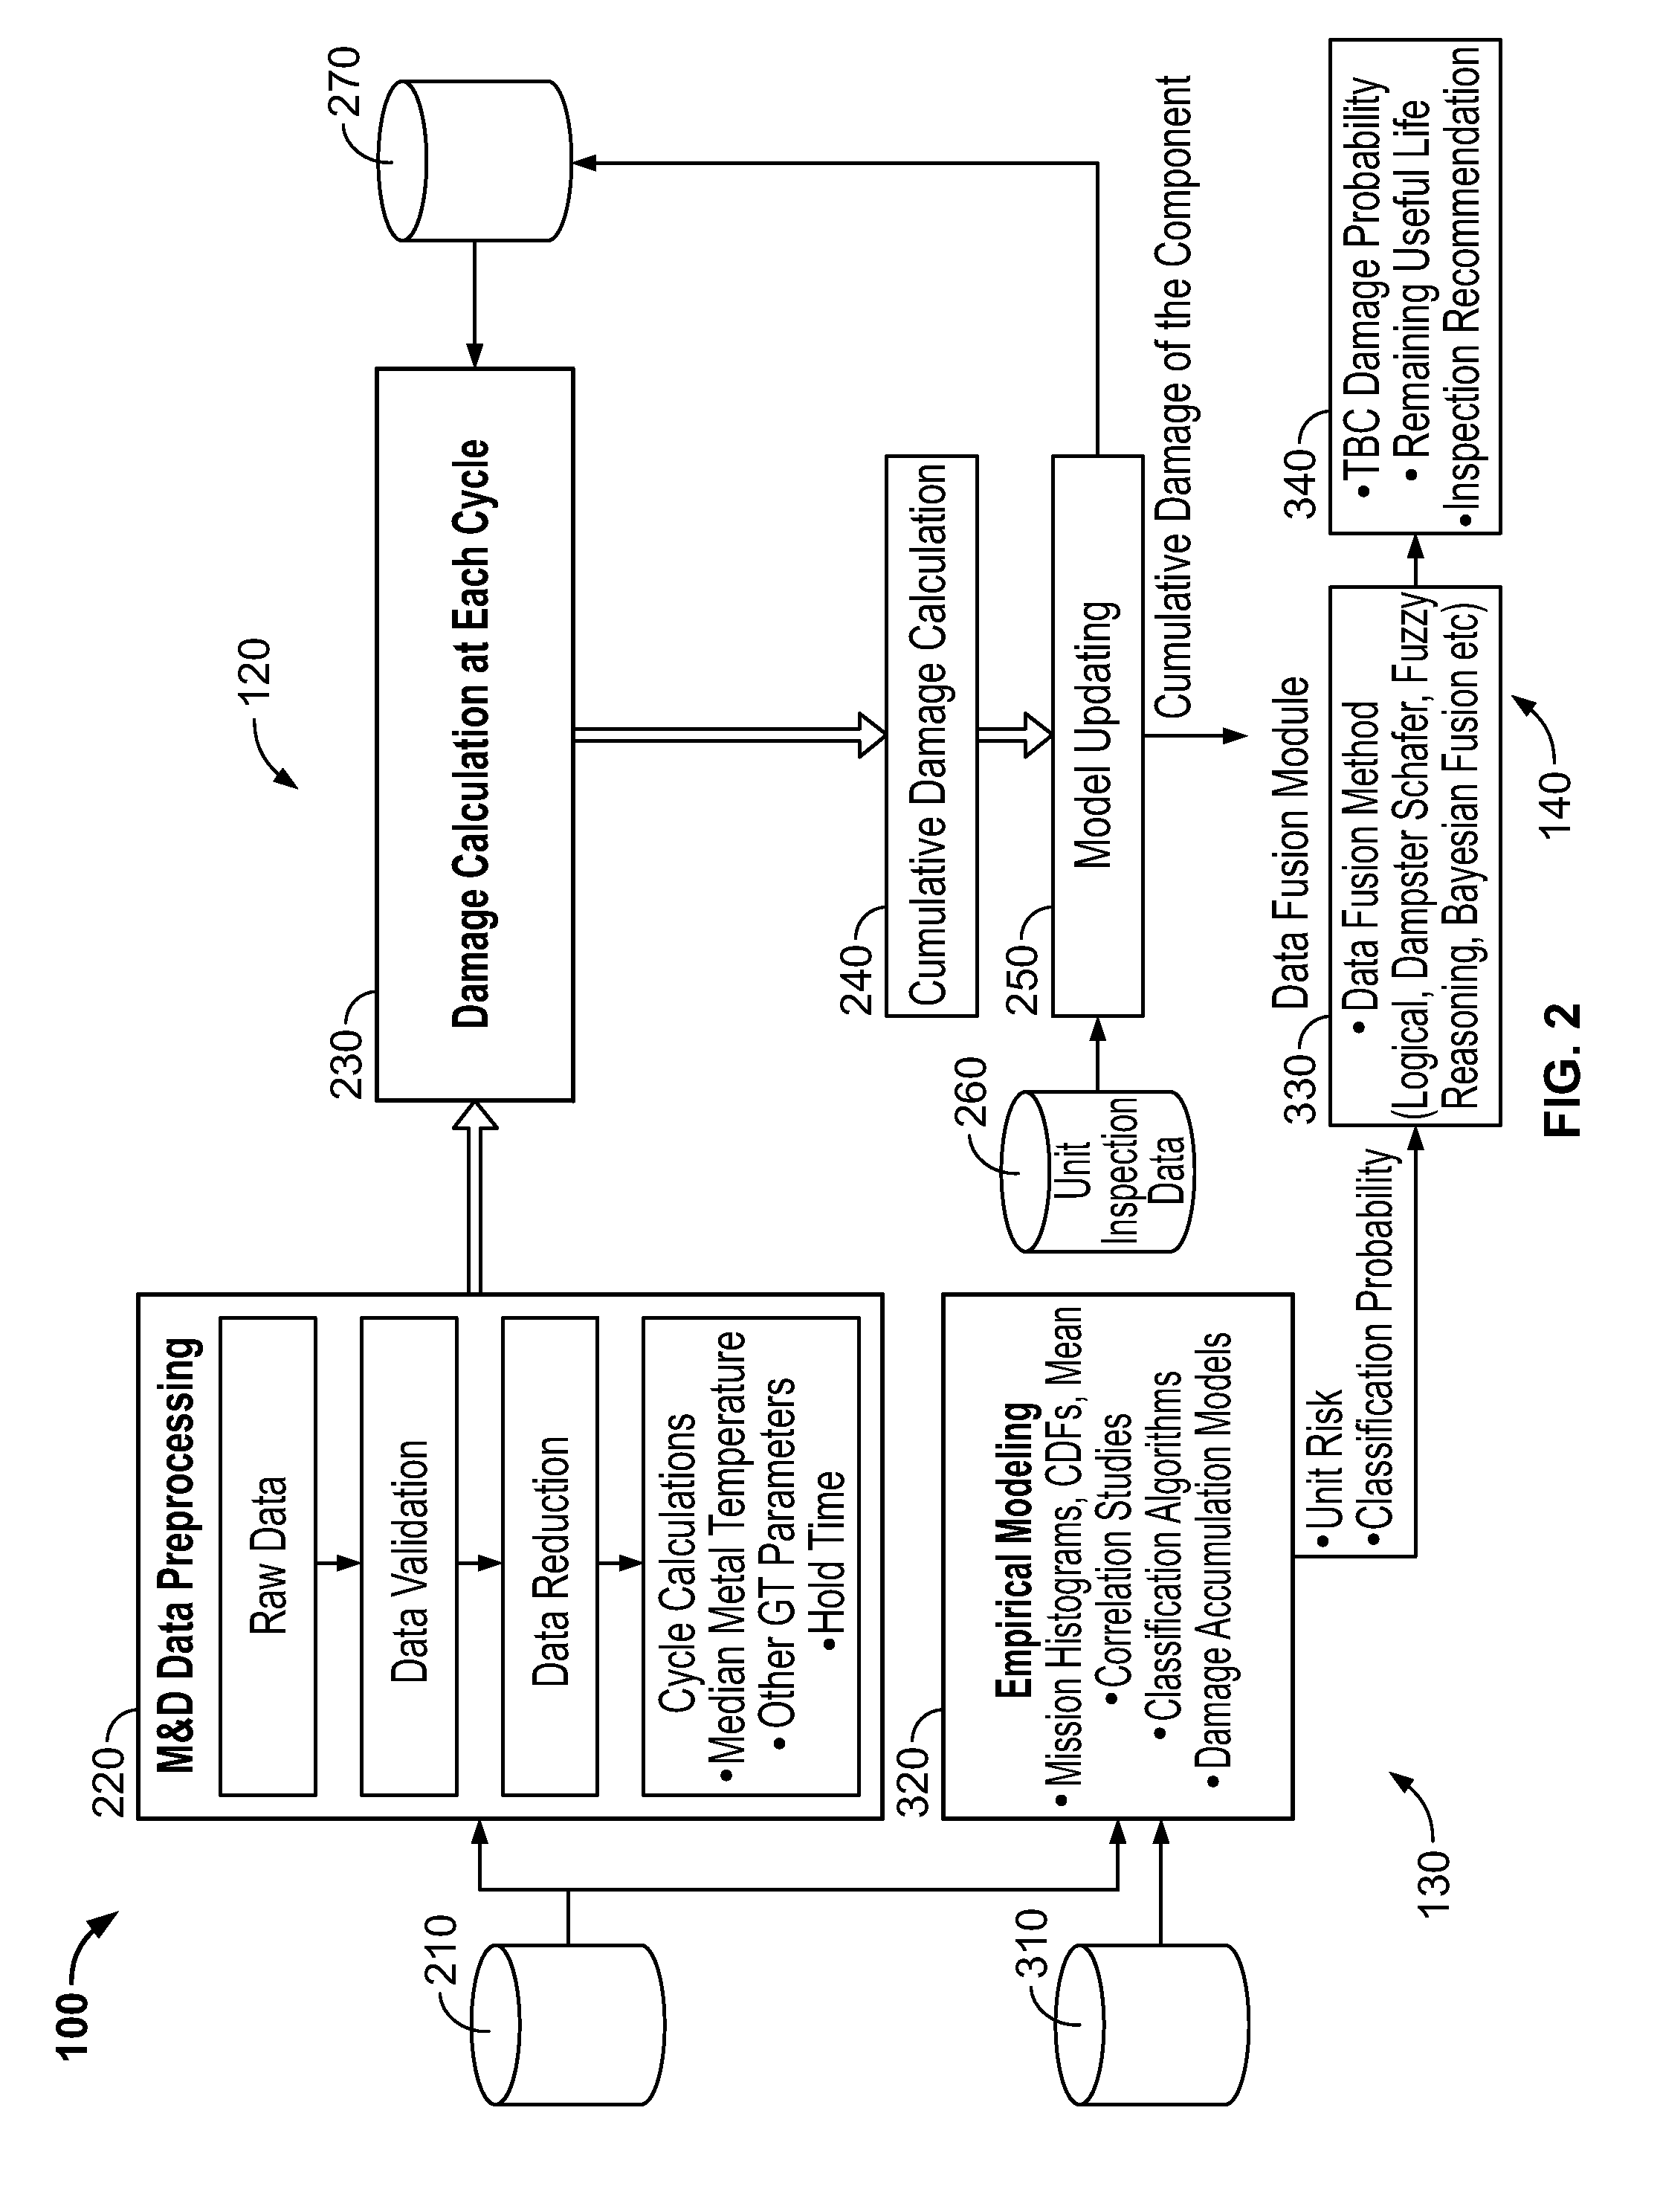 Life management system and method for gas turbine thermal barrier coatings